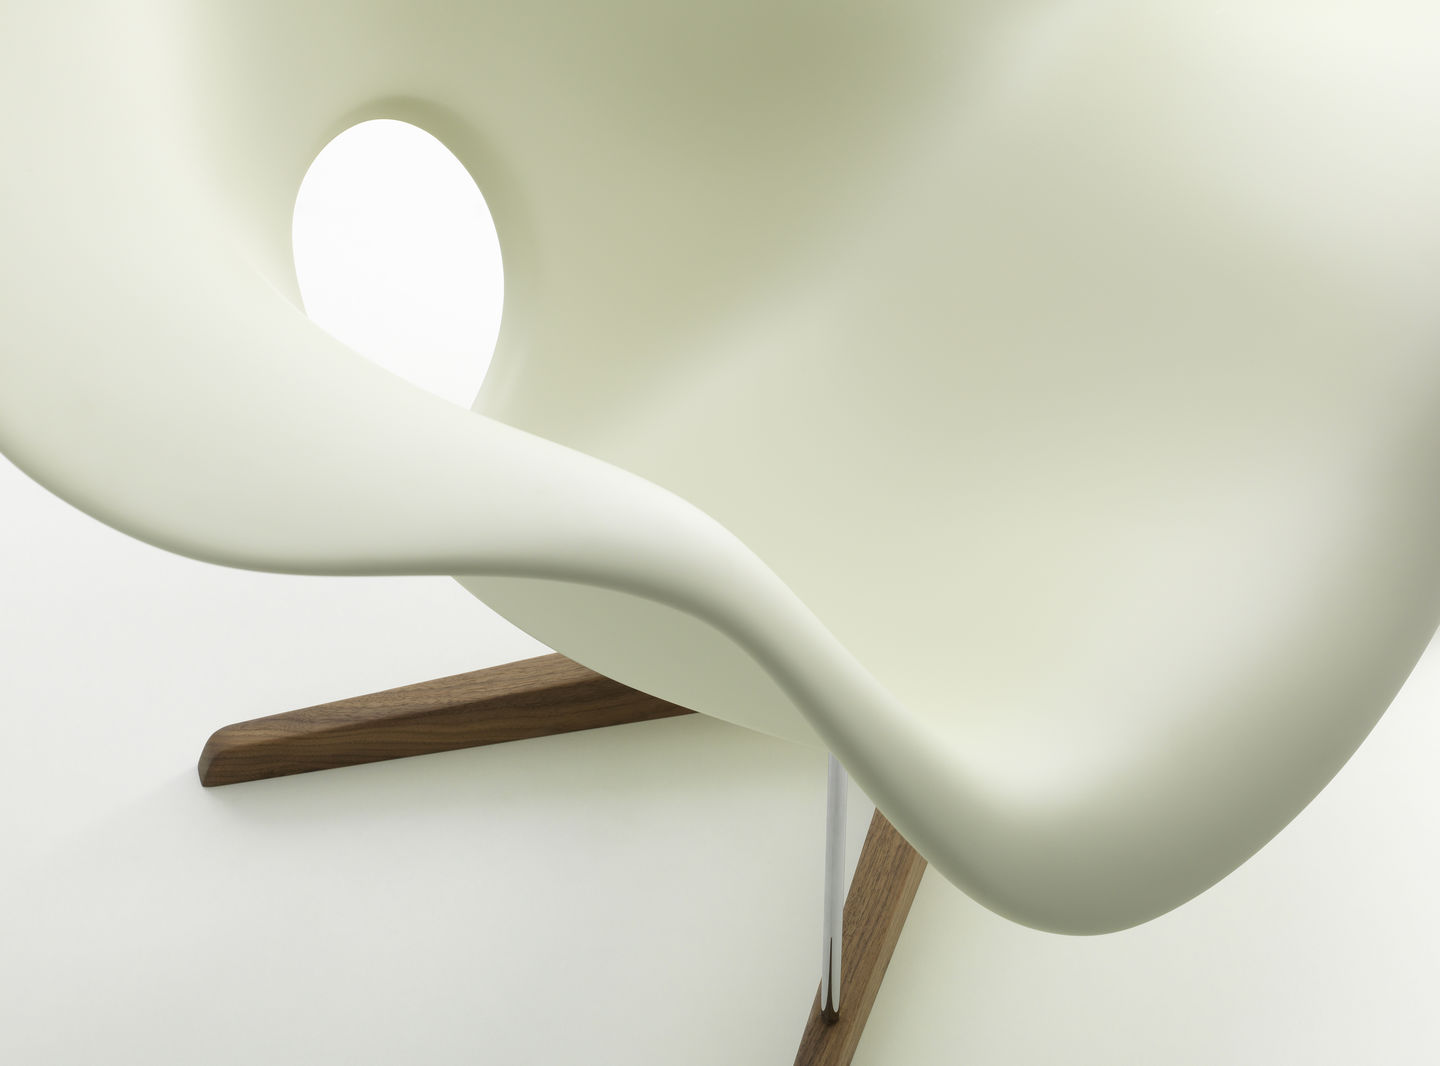 7564631_La-Chaise-Eames-special-collection-2023-Detail_v_fullbleed_1440x